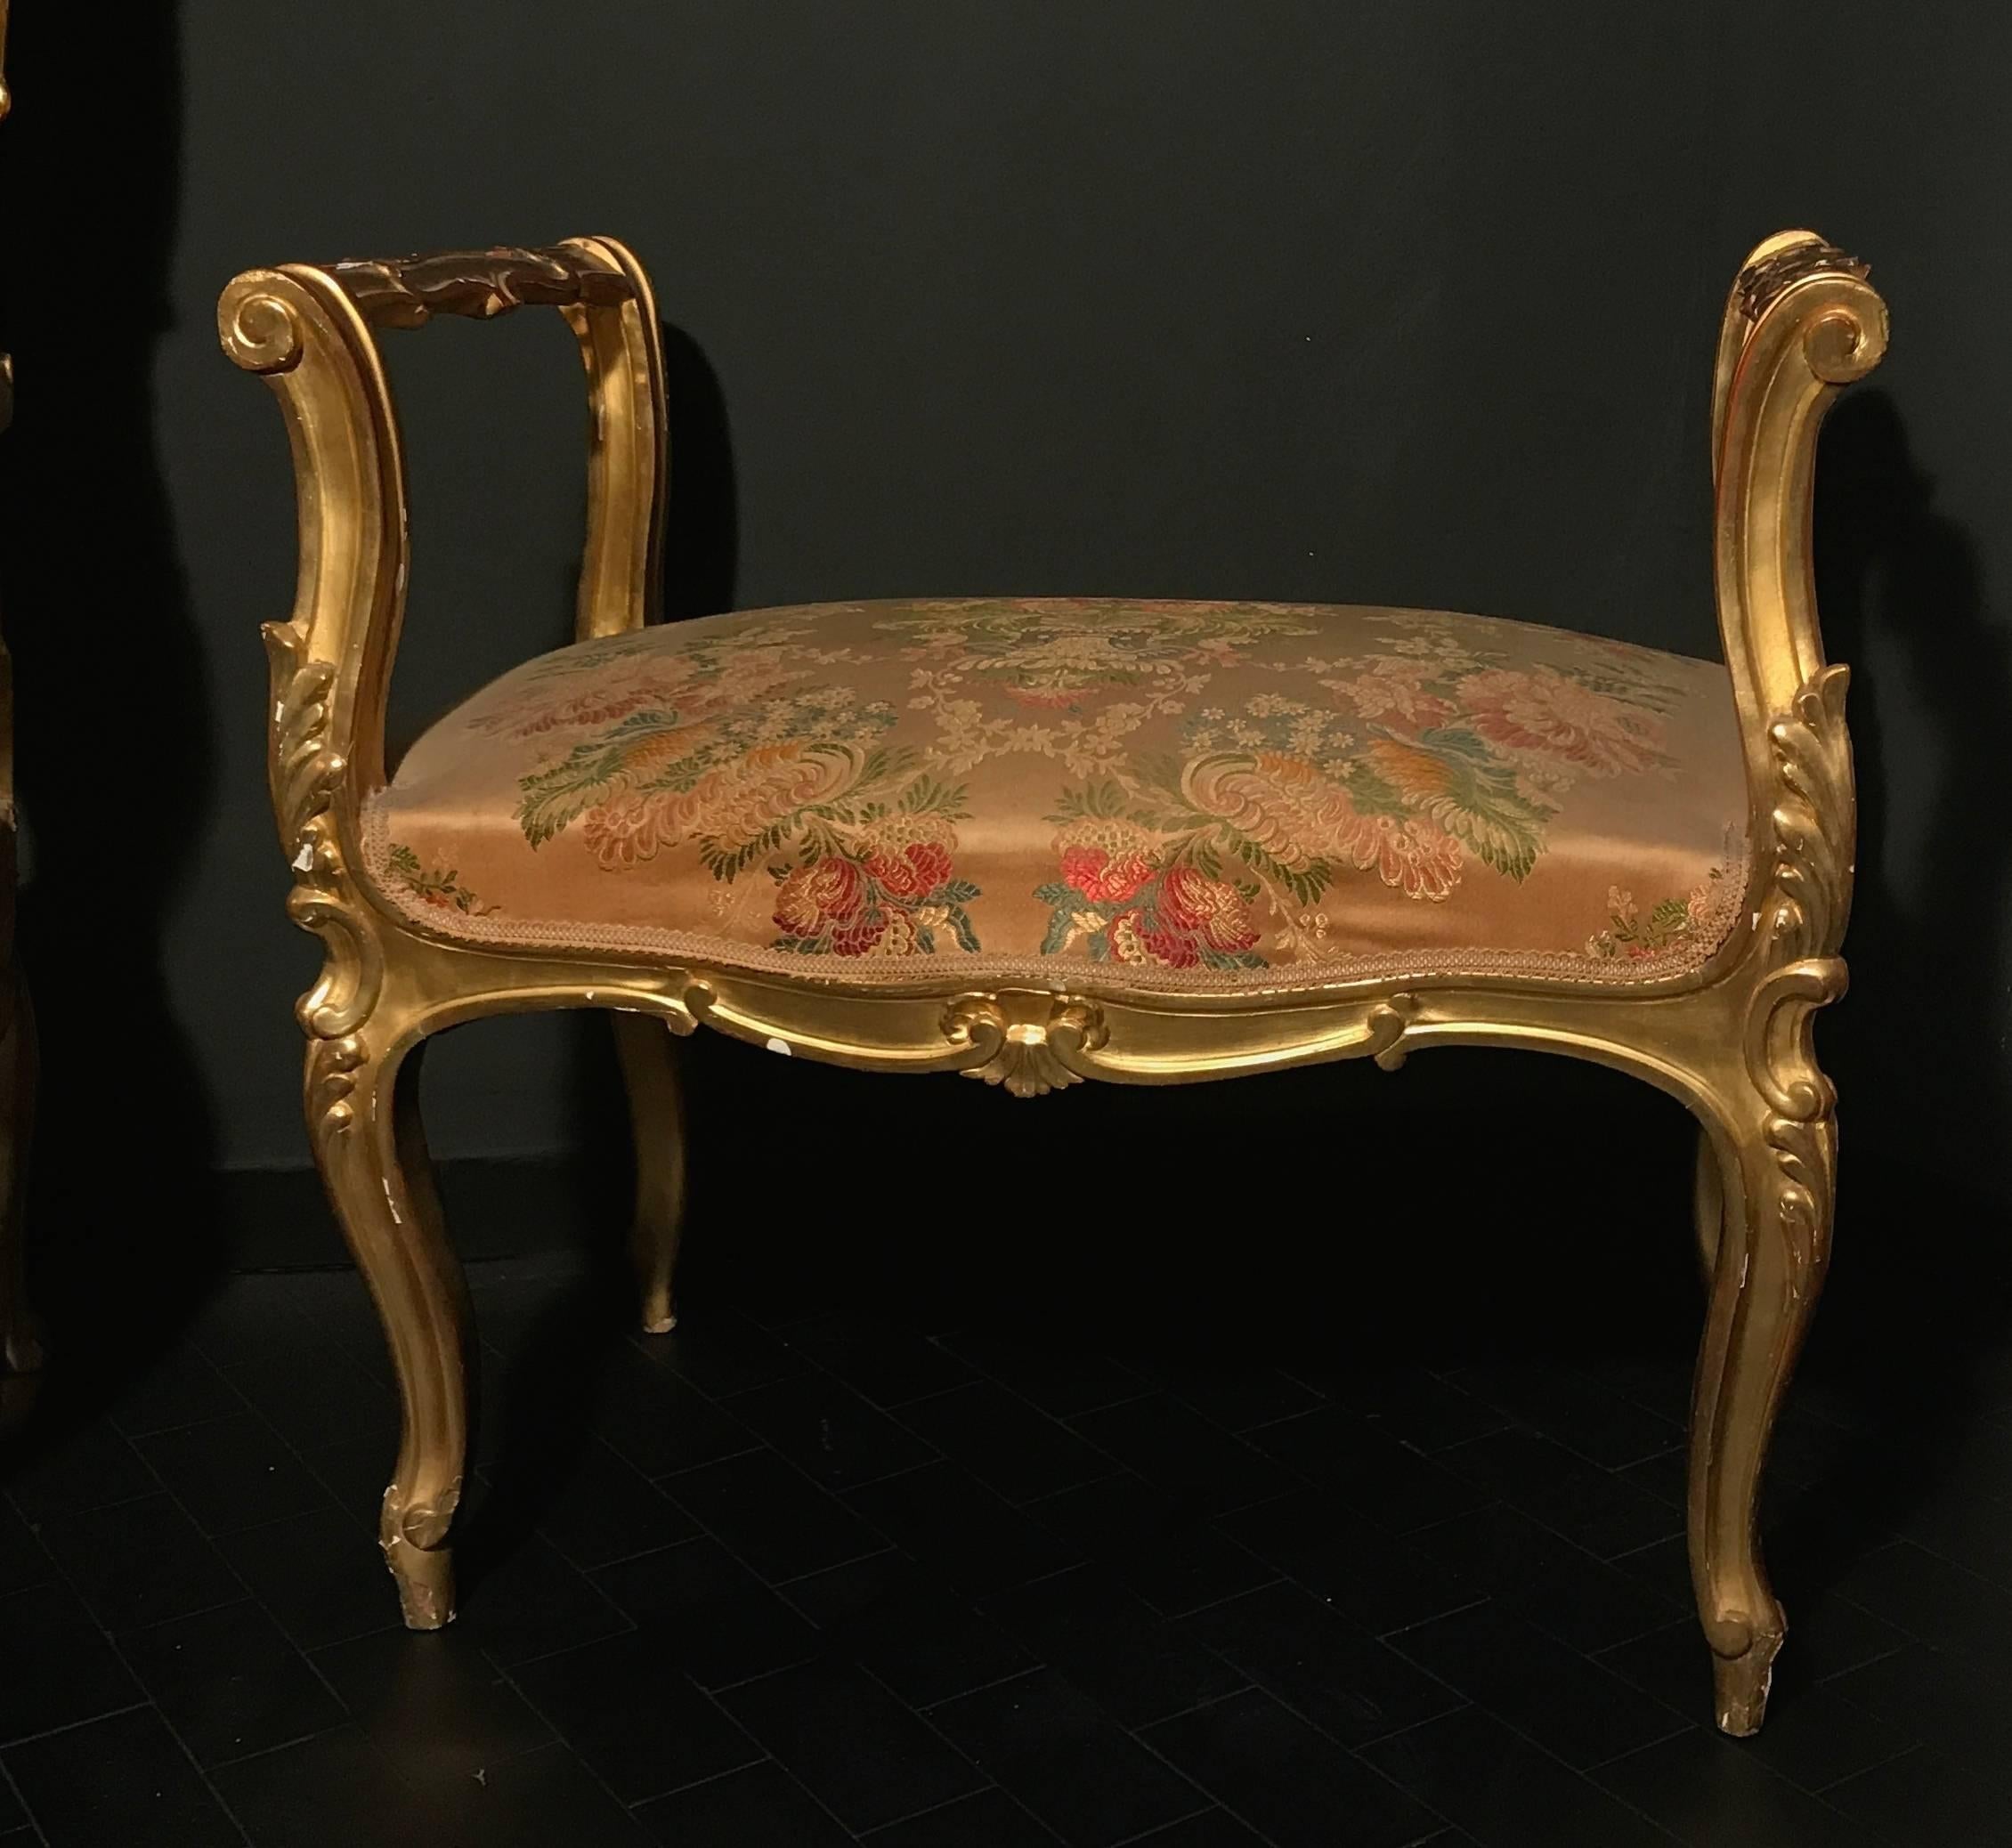 Giltwood Pair of 19th Century Italian Gilt-Wood  Window Benches or Settees For Sale